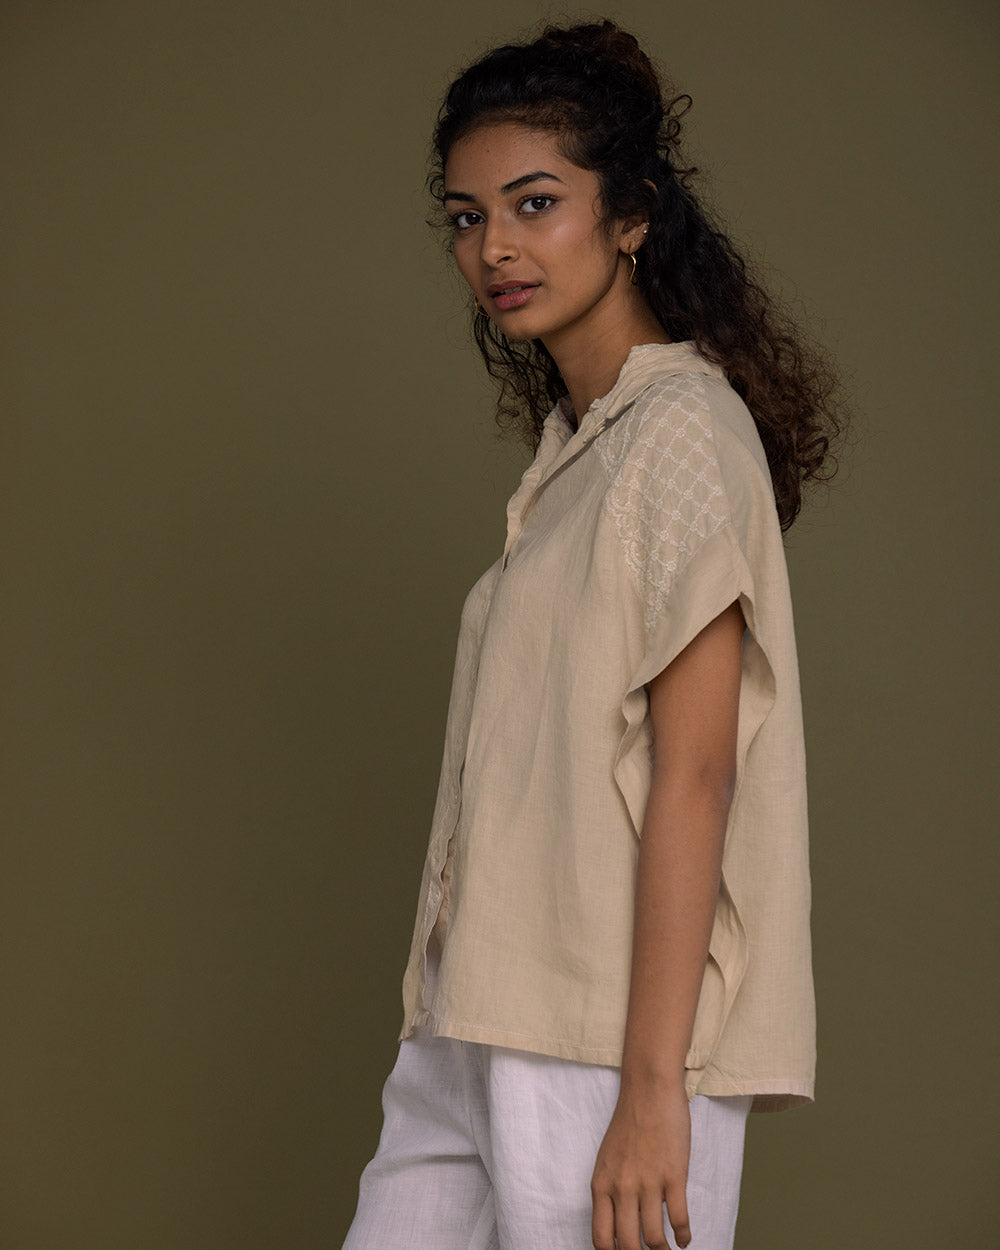 The End Of The Week Top - Sand Beige at Kamakhyaa by Reistor. This item is Brown, Casual Wear, Embroidered, Hemp, Natural, Shirts, Tops, Tunic Tops, Womenswear